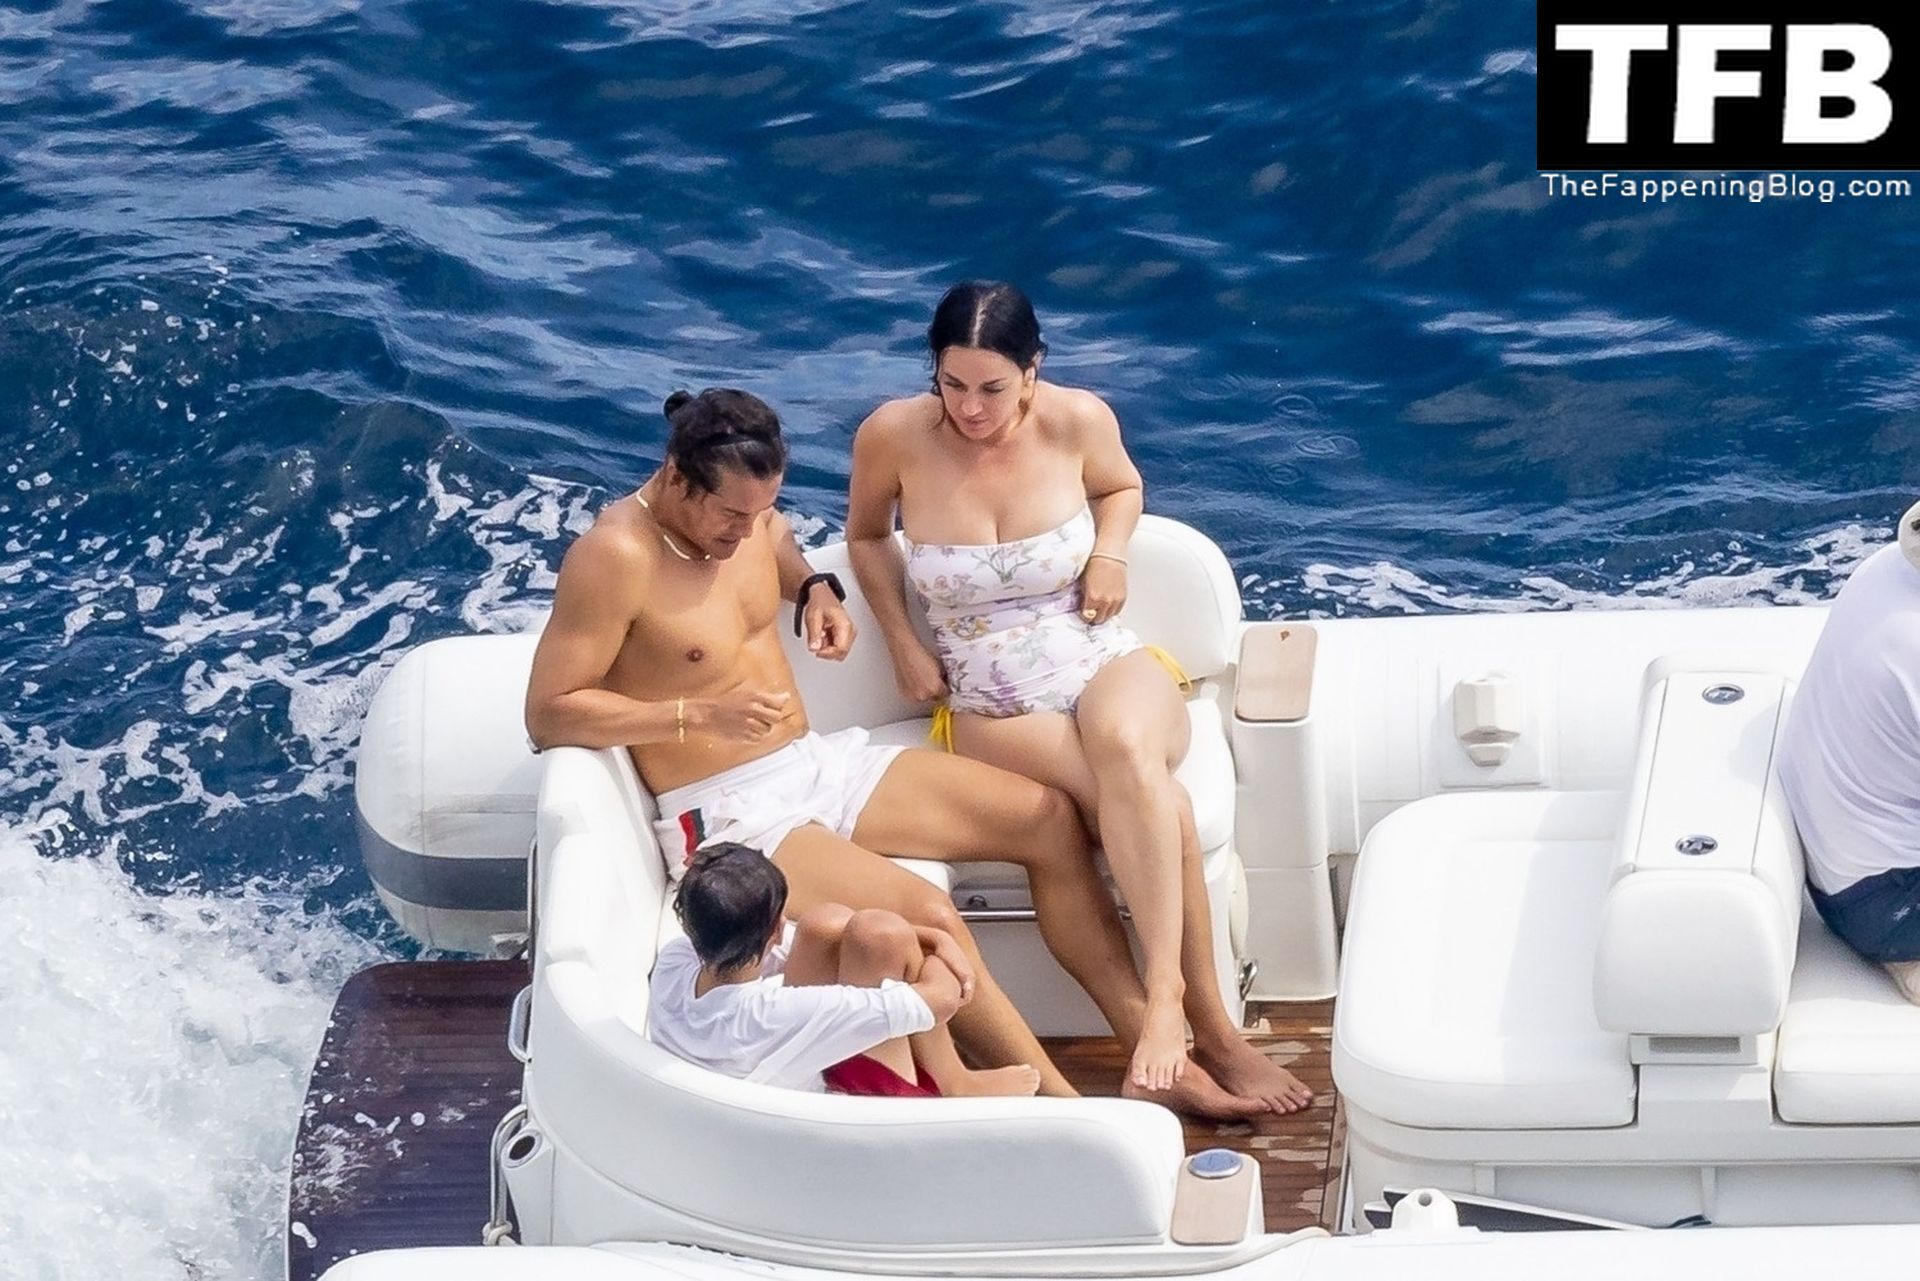 Katy Perry Sexy The Fappening Blog 6 - Katy Perry Rocks a Strapless Swimsuit While Enjoying a Beach Day with Orlando Bloom in Positano (105 Photos)